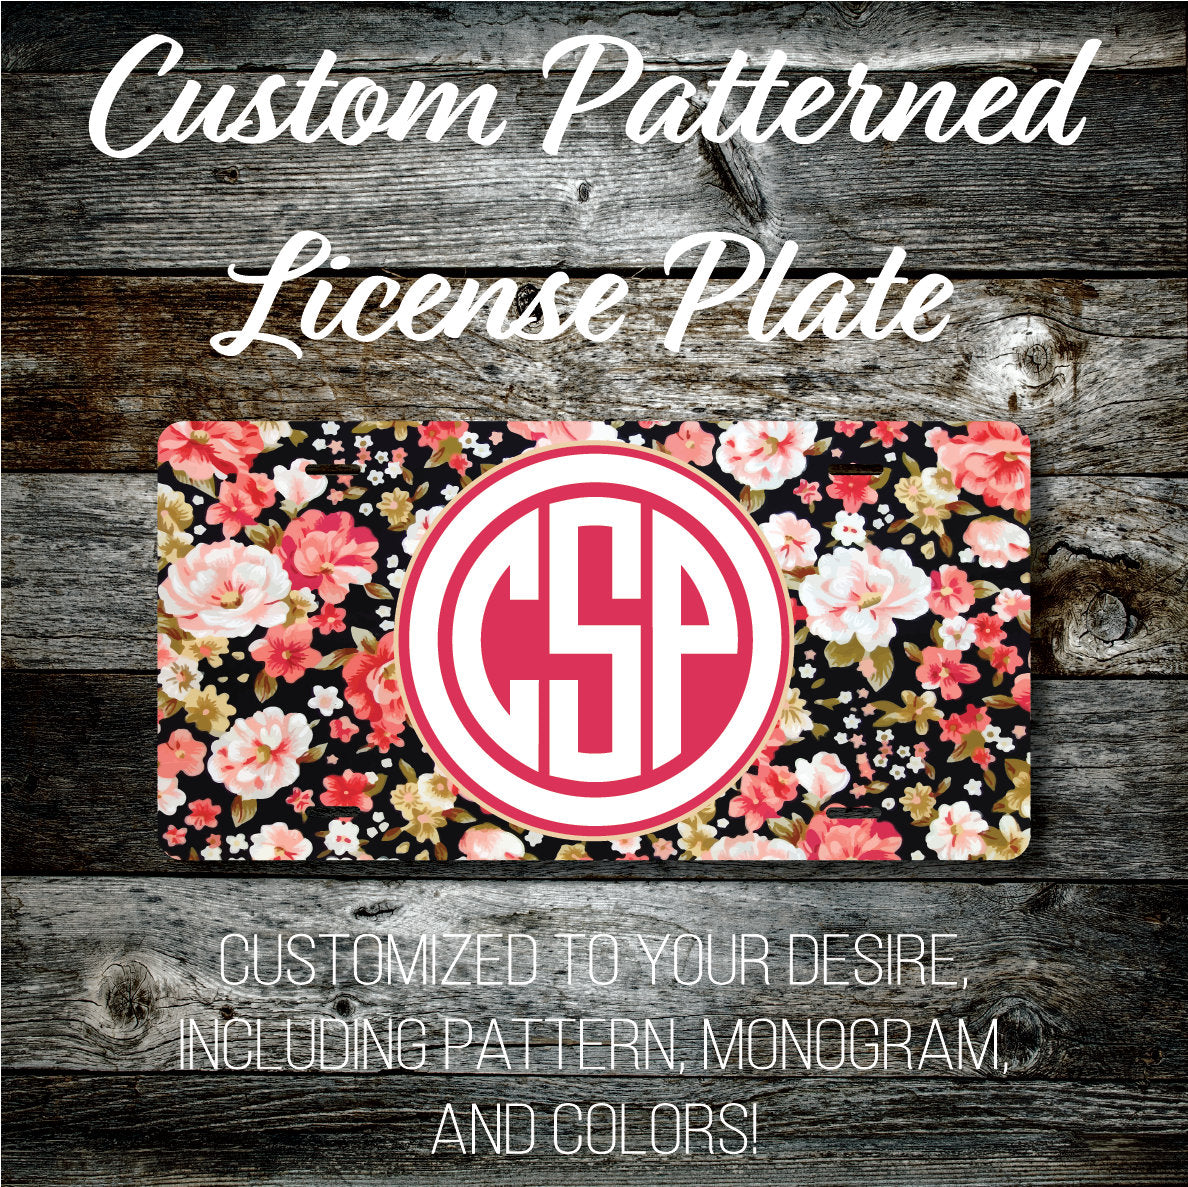 Personalized Monogrammed Custom License Plate (Pattern #262), Car Tag, Vanity license plate, Floral & Stripes Watercolor